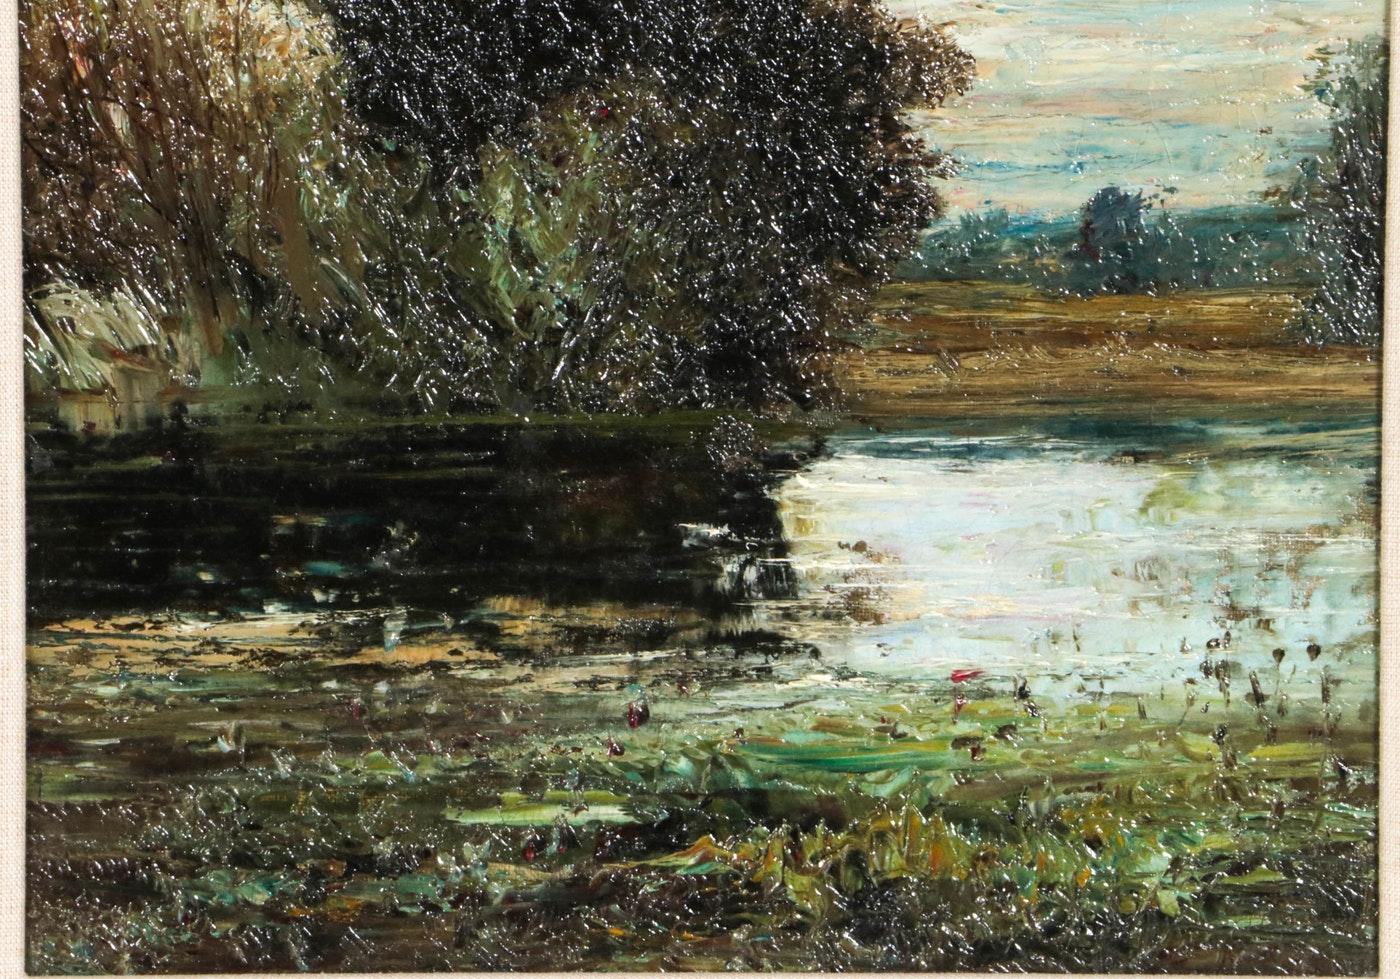 American School. The Pond: Sunlight and Clearing Clouds. Late nineteenth century. 13 7/8 x 11 1/8 x 1 1/4.
Unsigned. Frost & Adams stamp to the verso. The painting has been cleaned and relined; minor discolorations; craquelure. Housed in a linen